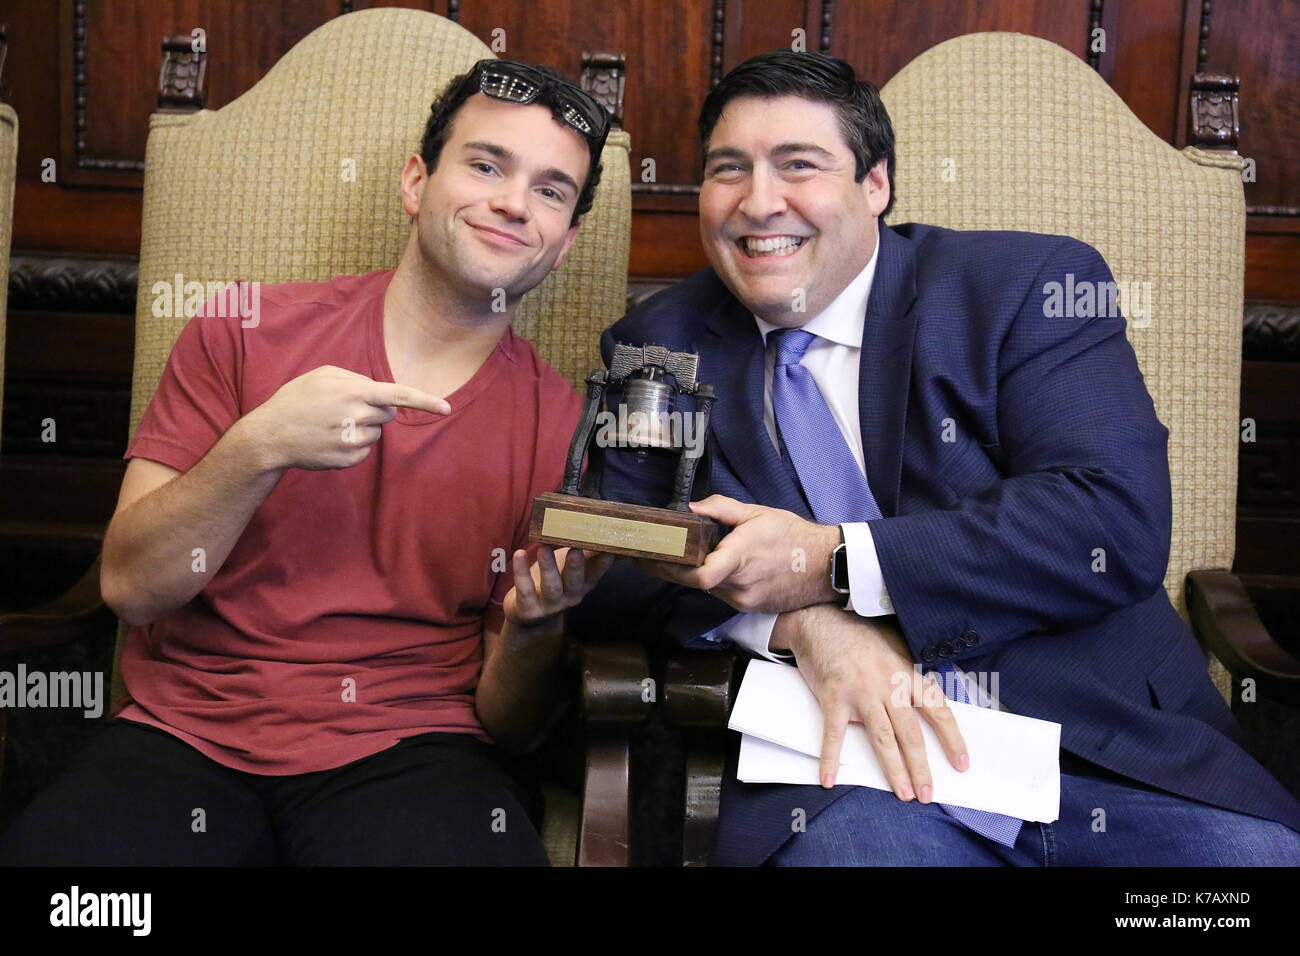 Pjiladelphia, PA, USA. 15th Sep, 2017. Actor Troy Gentile, who plays Barry Goldberg and producer Adam F Goldberg pictured with Liberty bell given by Philadelphia Mayor Jim Kenney for the Goldbergs in City Hall in Philadelphia, Pa on September 15, 2017 Credit: Star Shooter/Media Punch/Alamy Live News Stock Photo